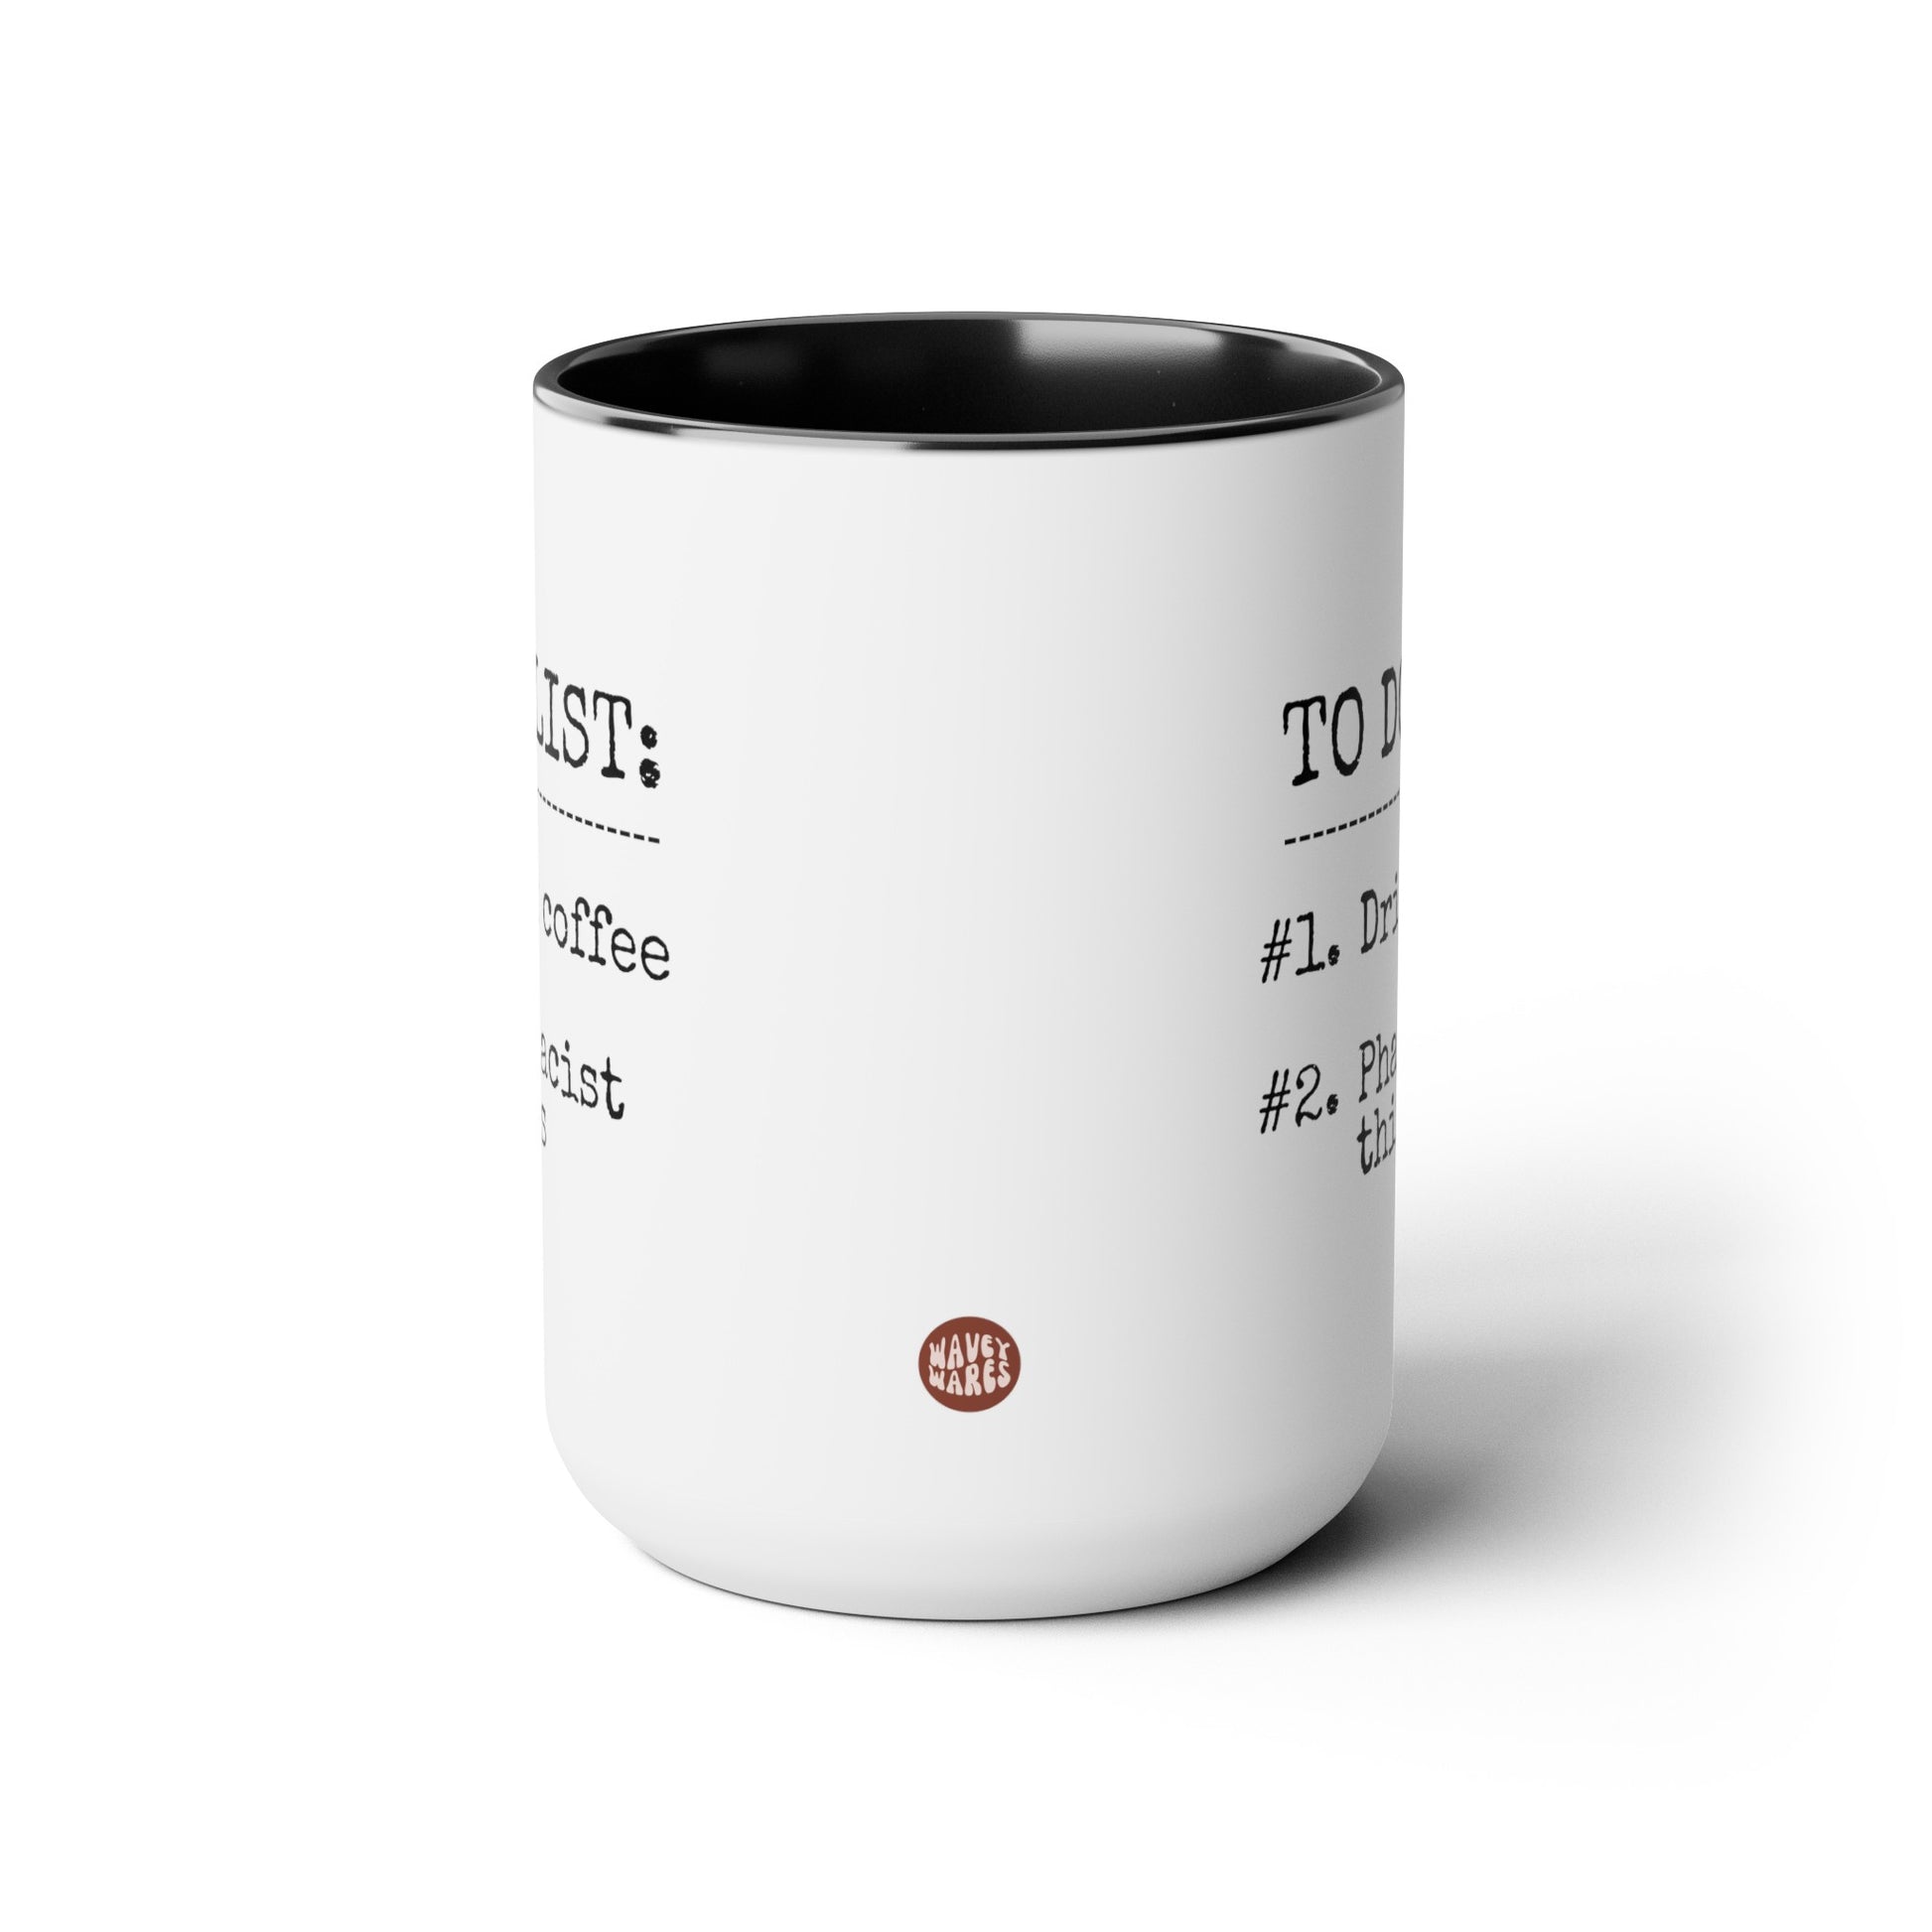 To Do List Drink Coffee Pharmacist Things 15oz white with black accent funny large coffee mug gift for pharmacy medicine graduation waveywares wavey wares wavywares wavy wares side